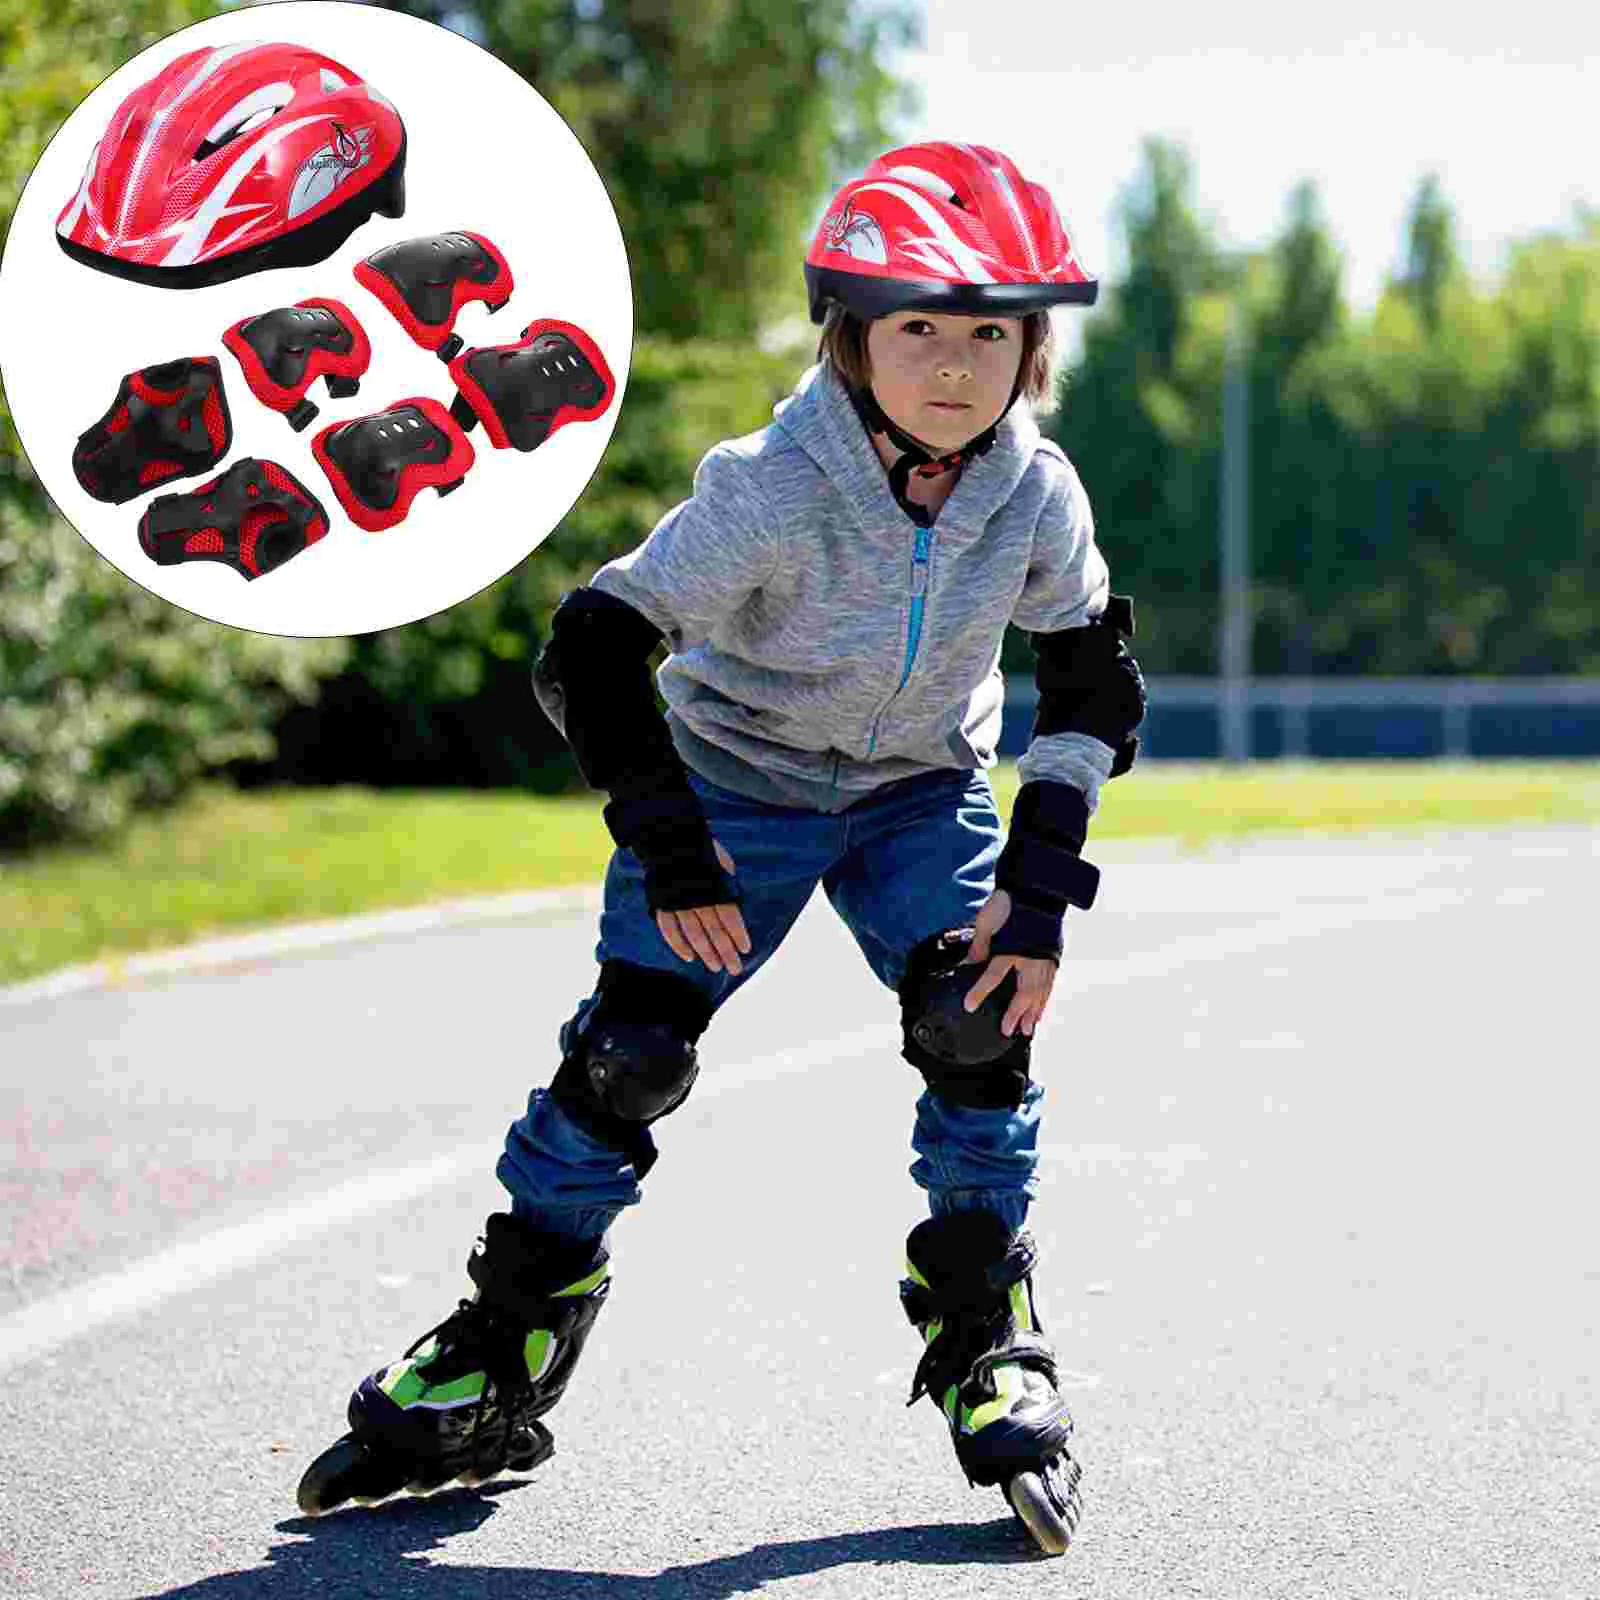 

7Pcs/Set Kids Roller Skating Protective Gear Absorbent Helmet Knee Elbow Wrist Pads For Bicycle Cycling Skateboard Scooter